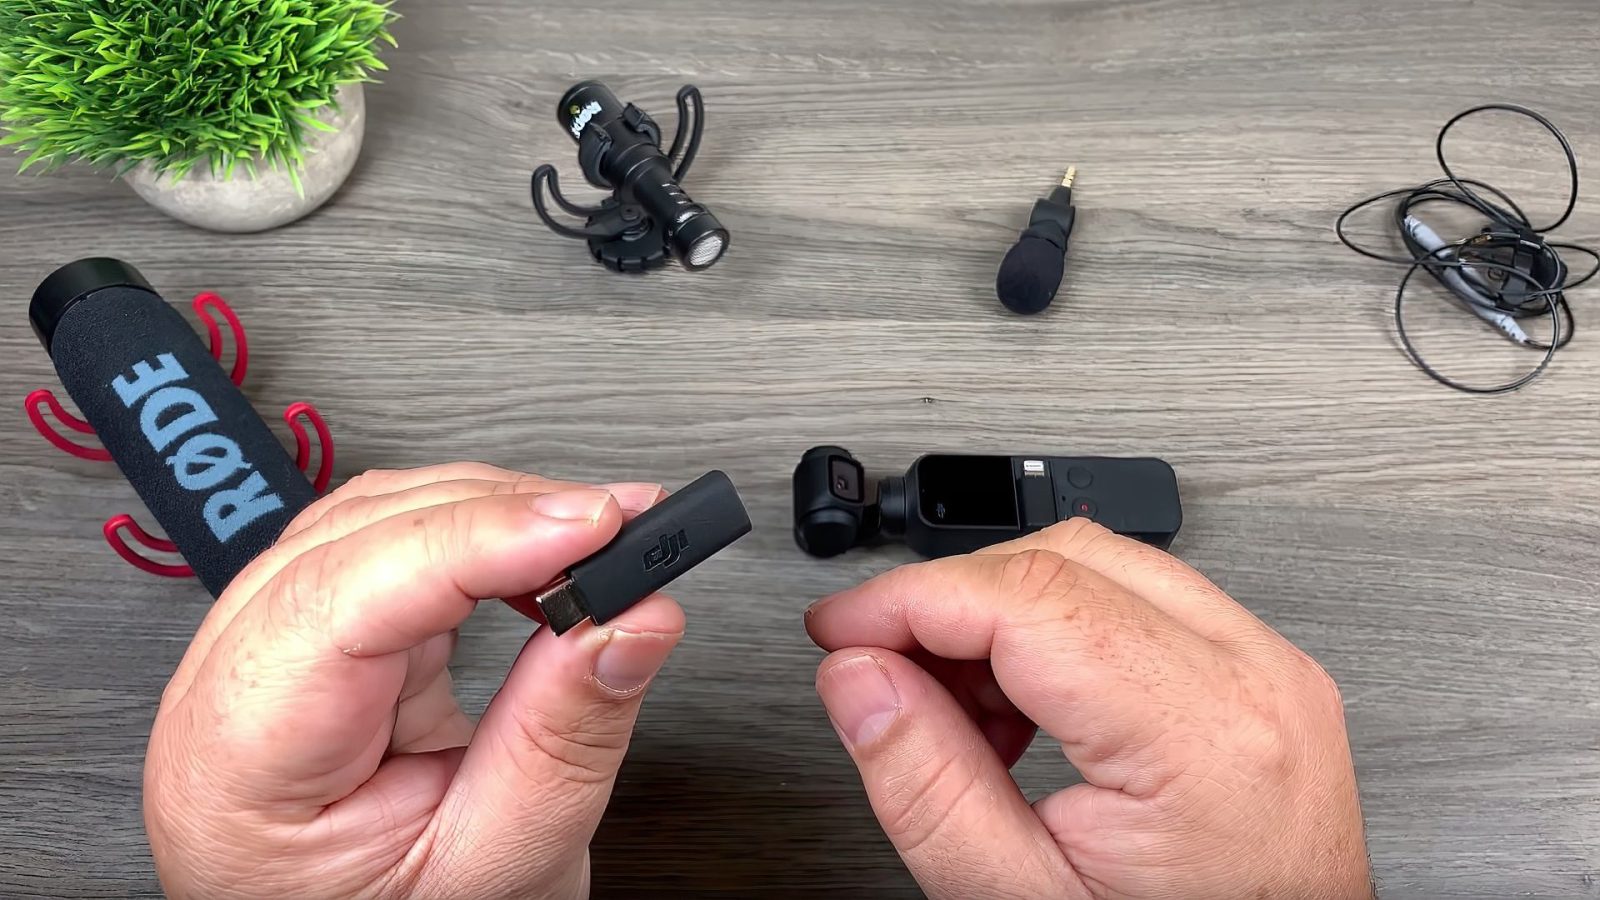 Finally, the DJI Osmo Pocket 3.5mm adapter is available